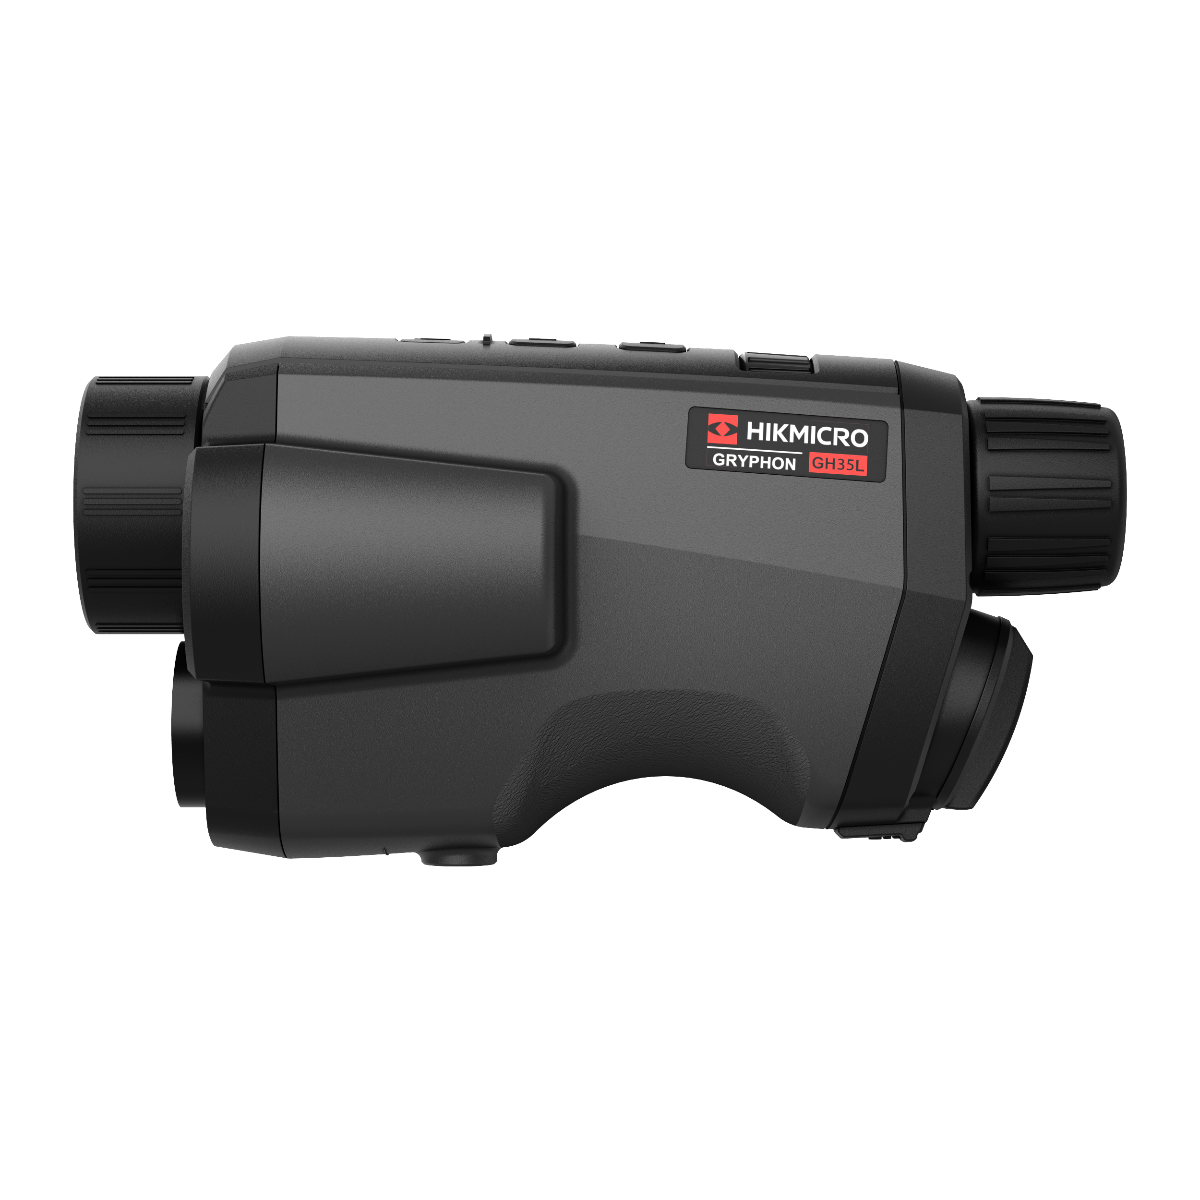 HIKMICRO Gryphon 35mm Pro Fusion Thermal & Optical Monocular With LRF (GQ35L)